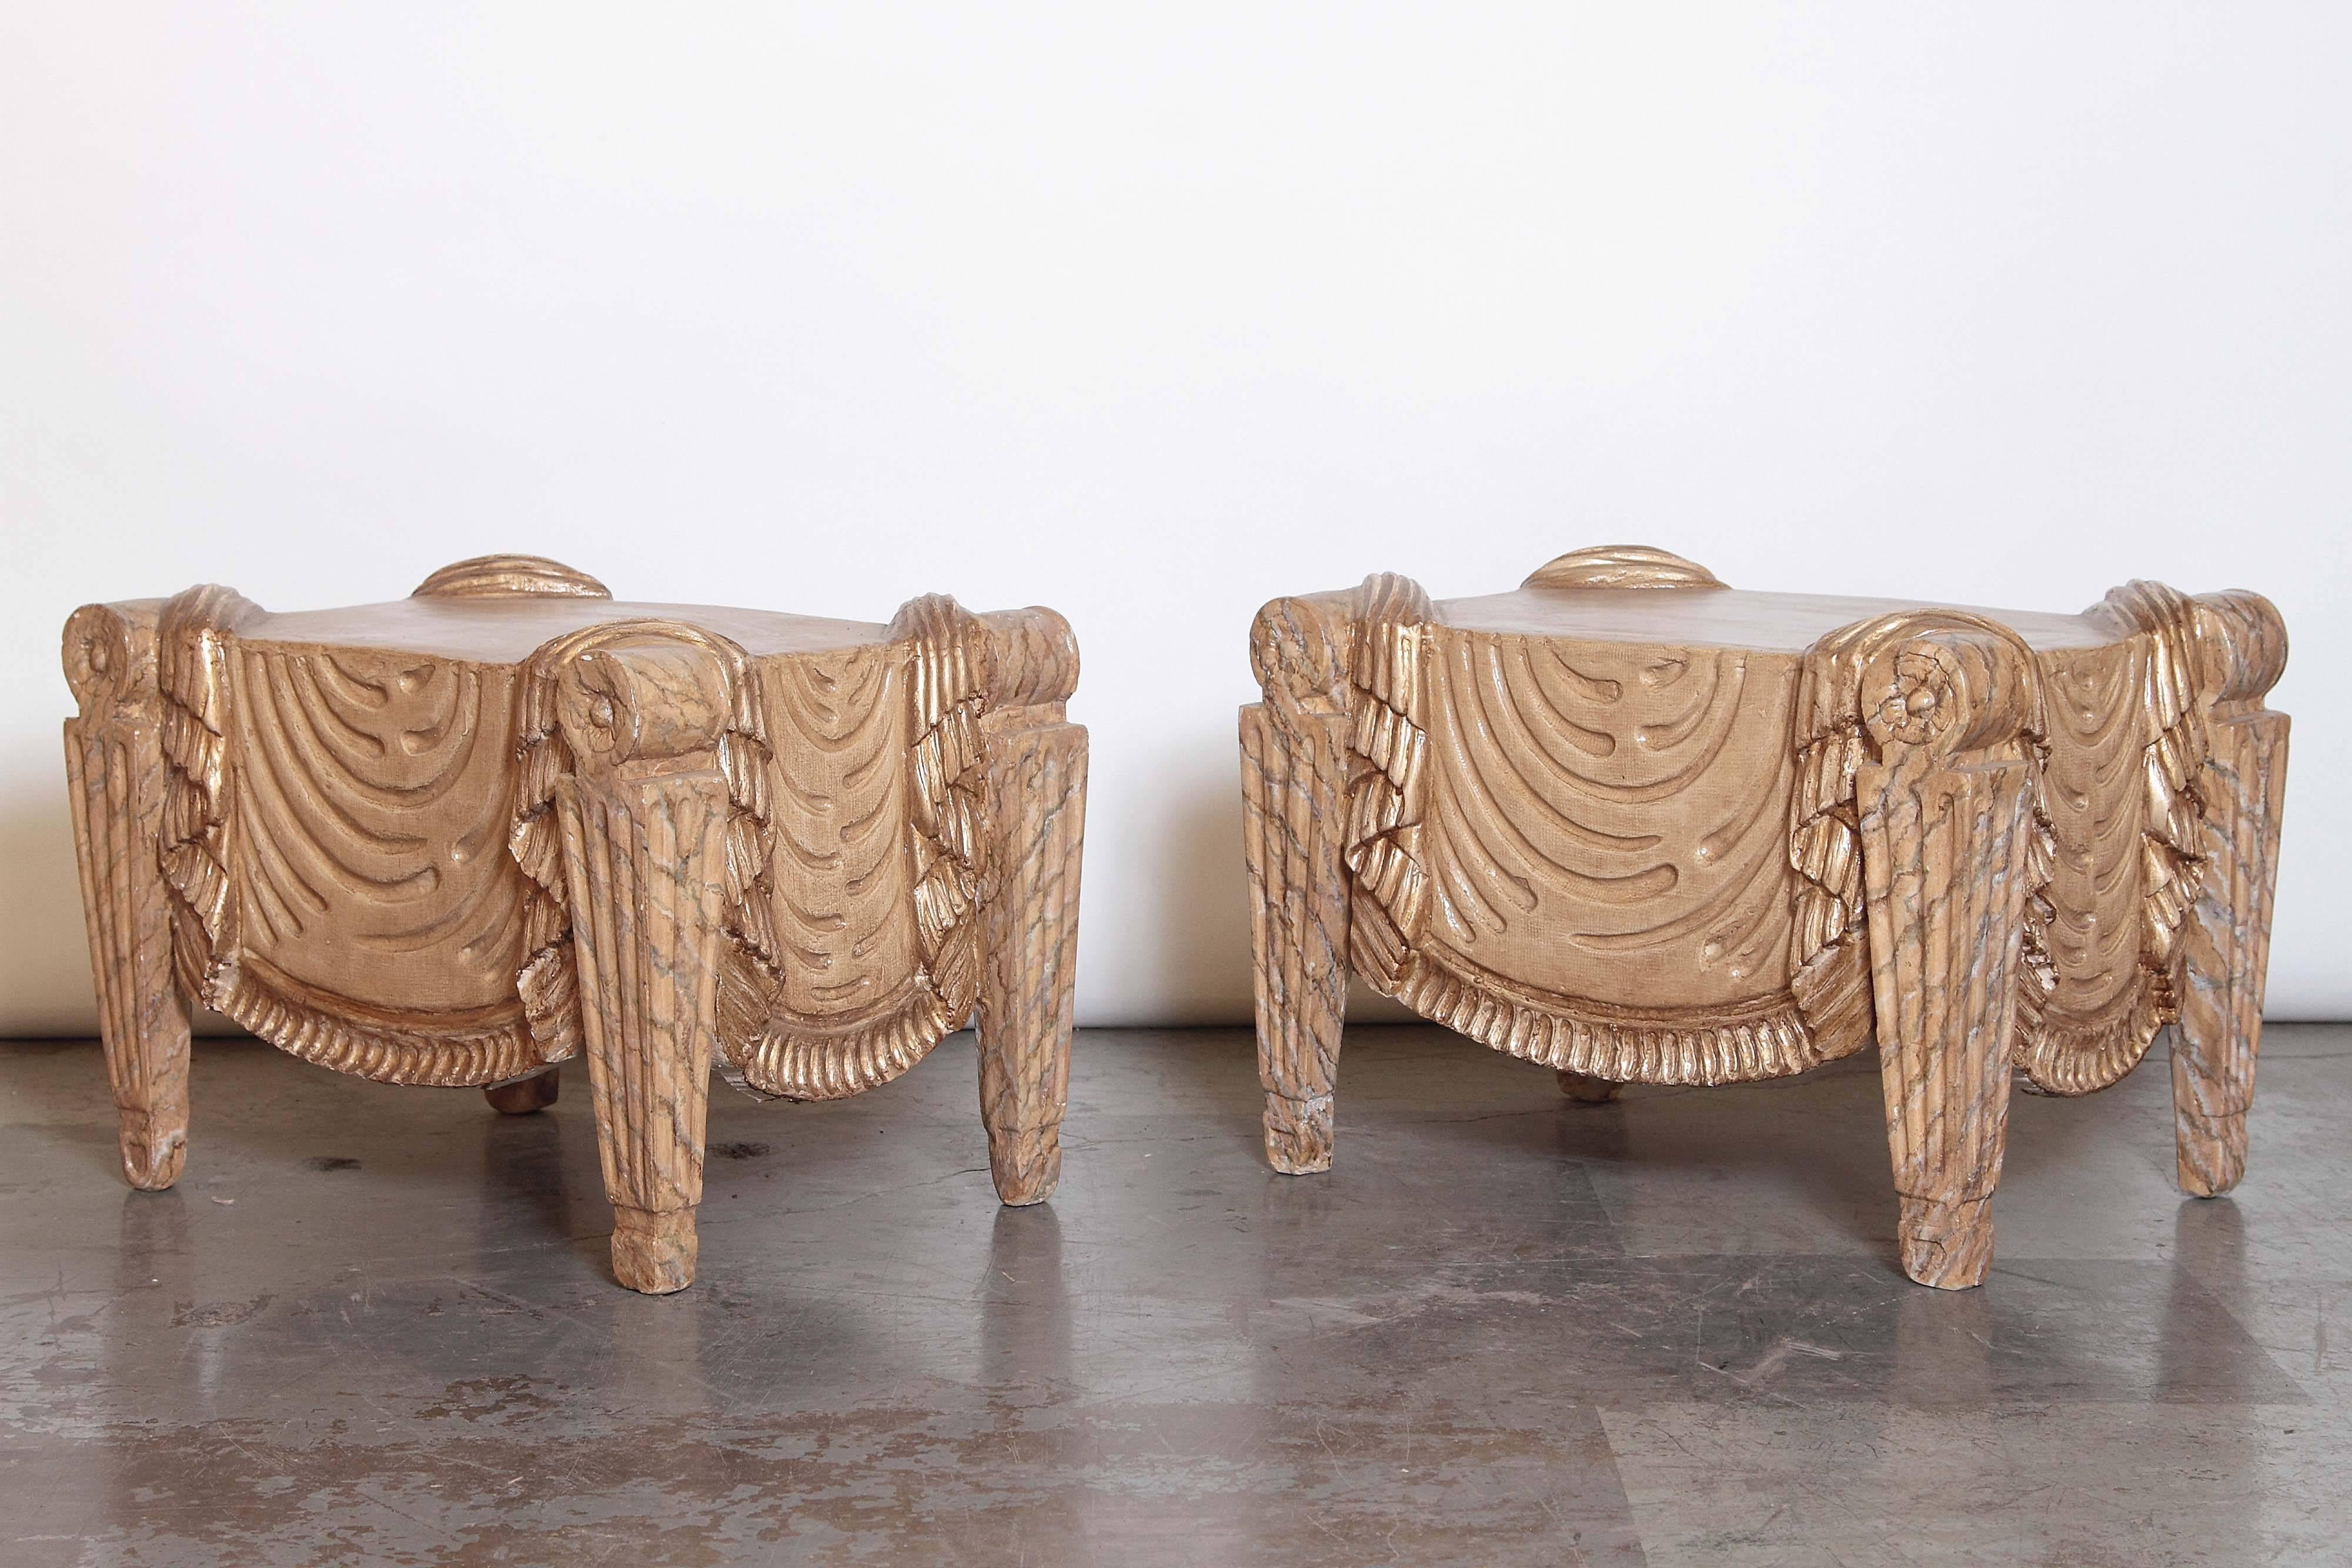 Painted, antique white, modeled as Roman fluted leg benches with encircling fringed drapery.